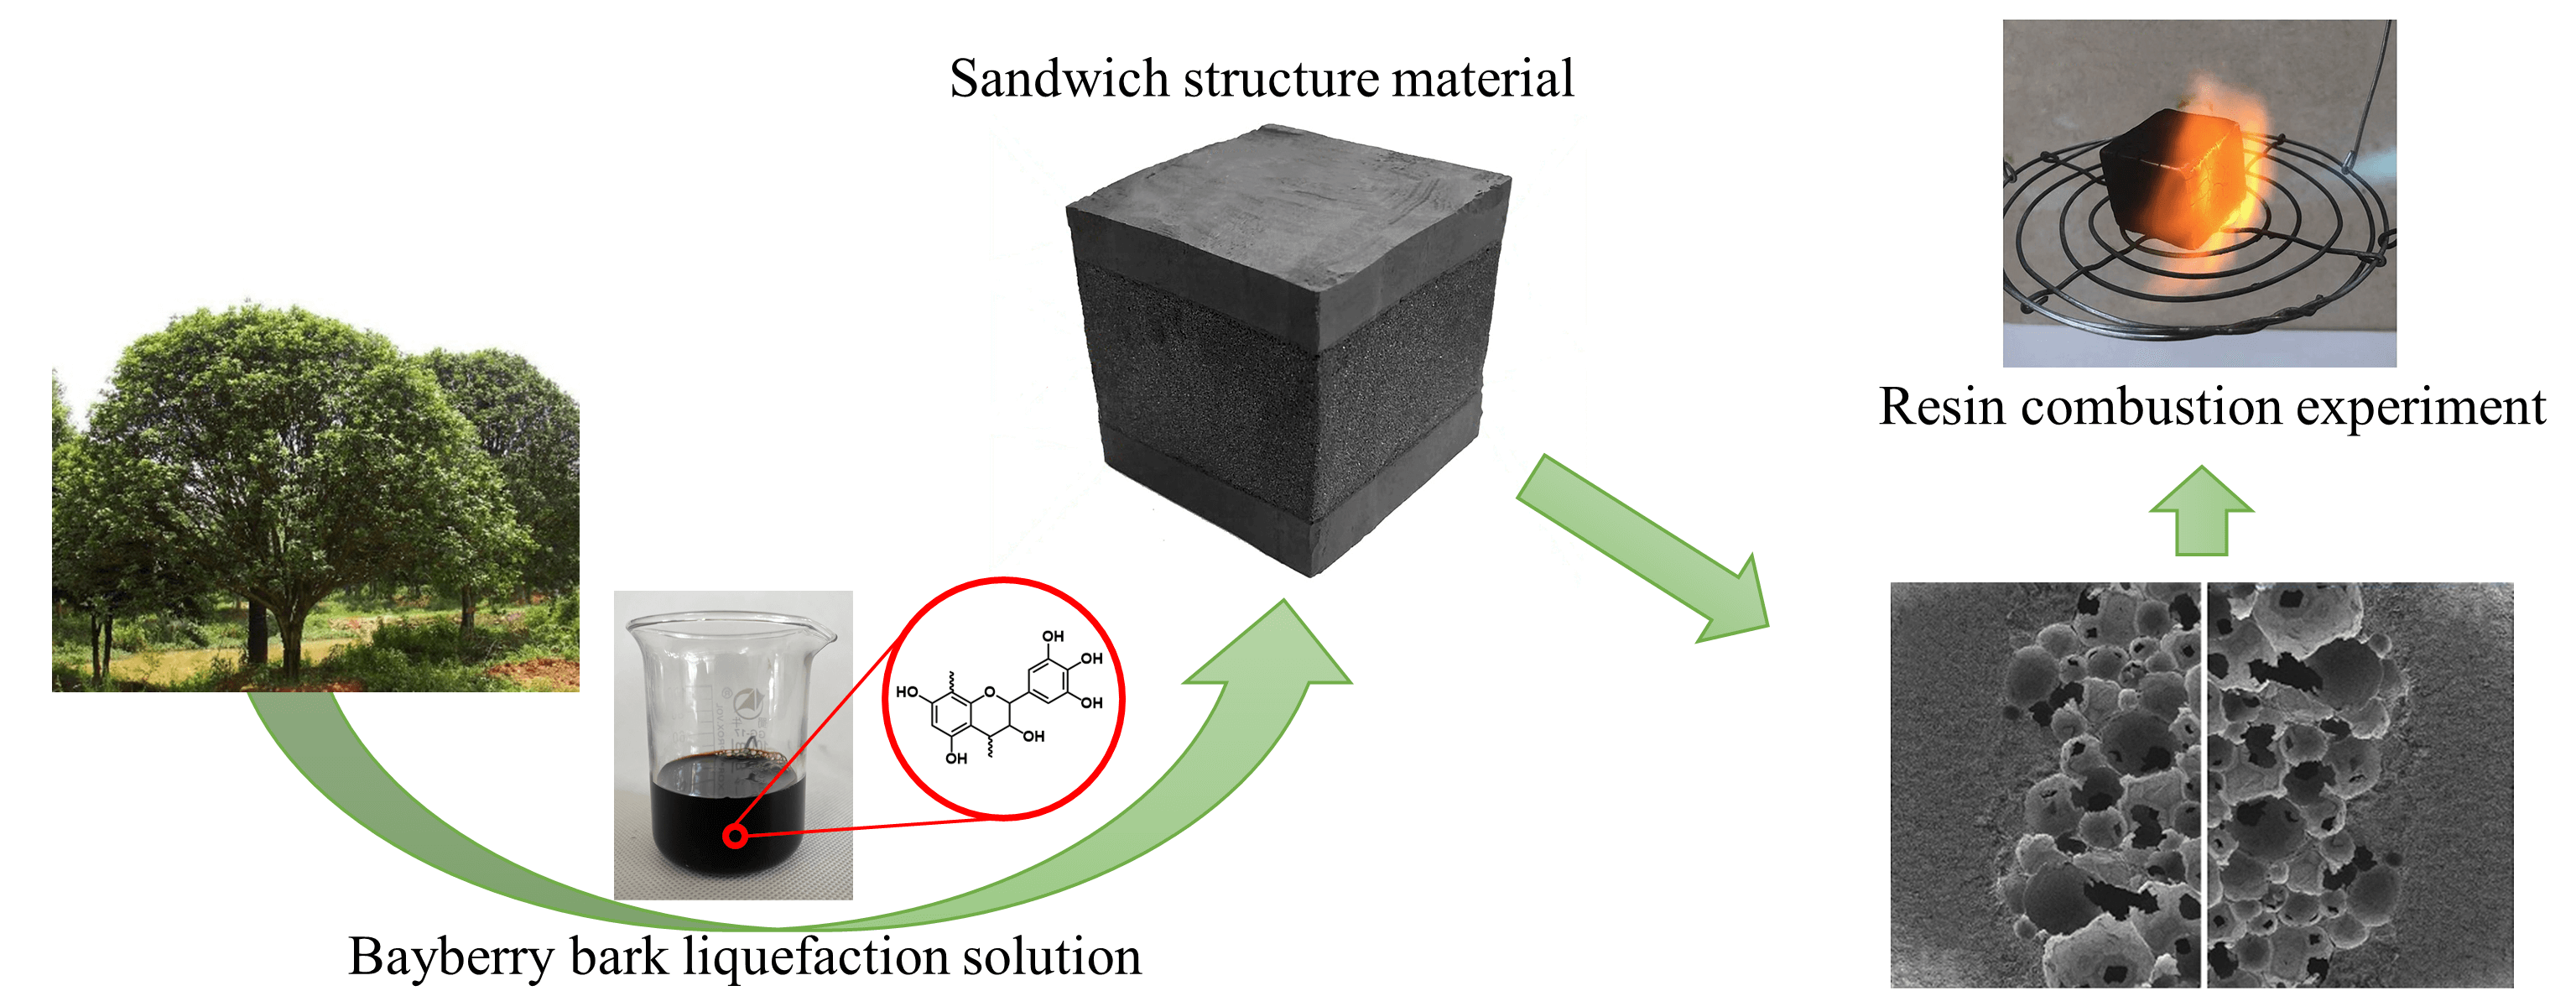 Preparation and Characterization of Sandwich Structured Materials with Interesting Insulation and Fire Resistance